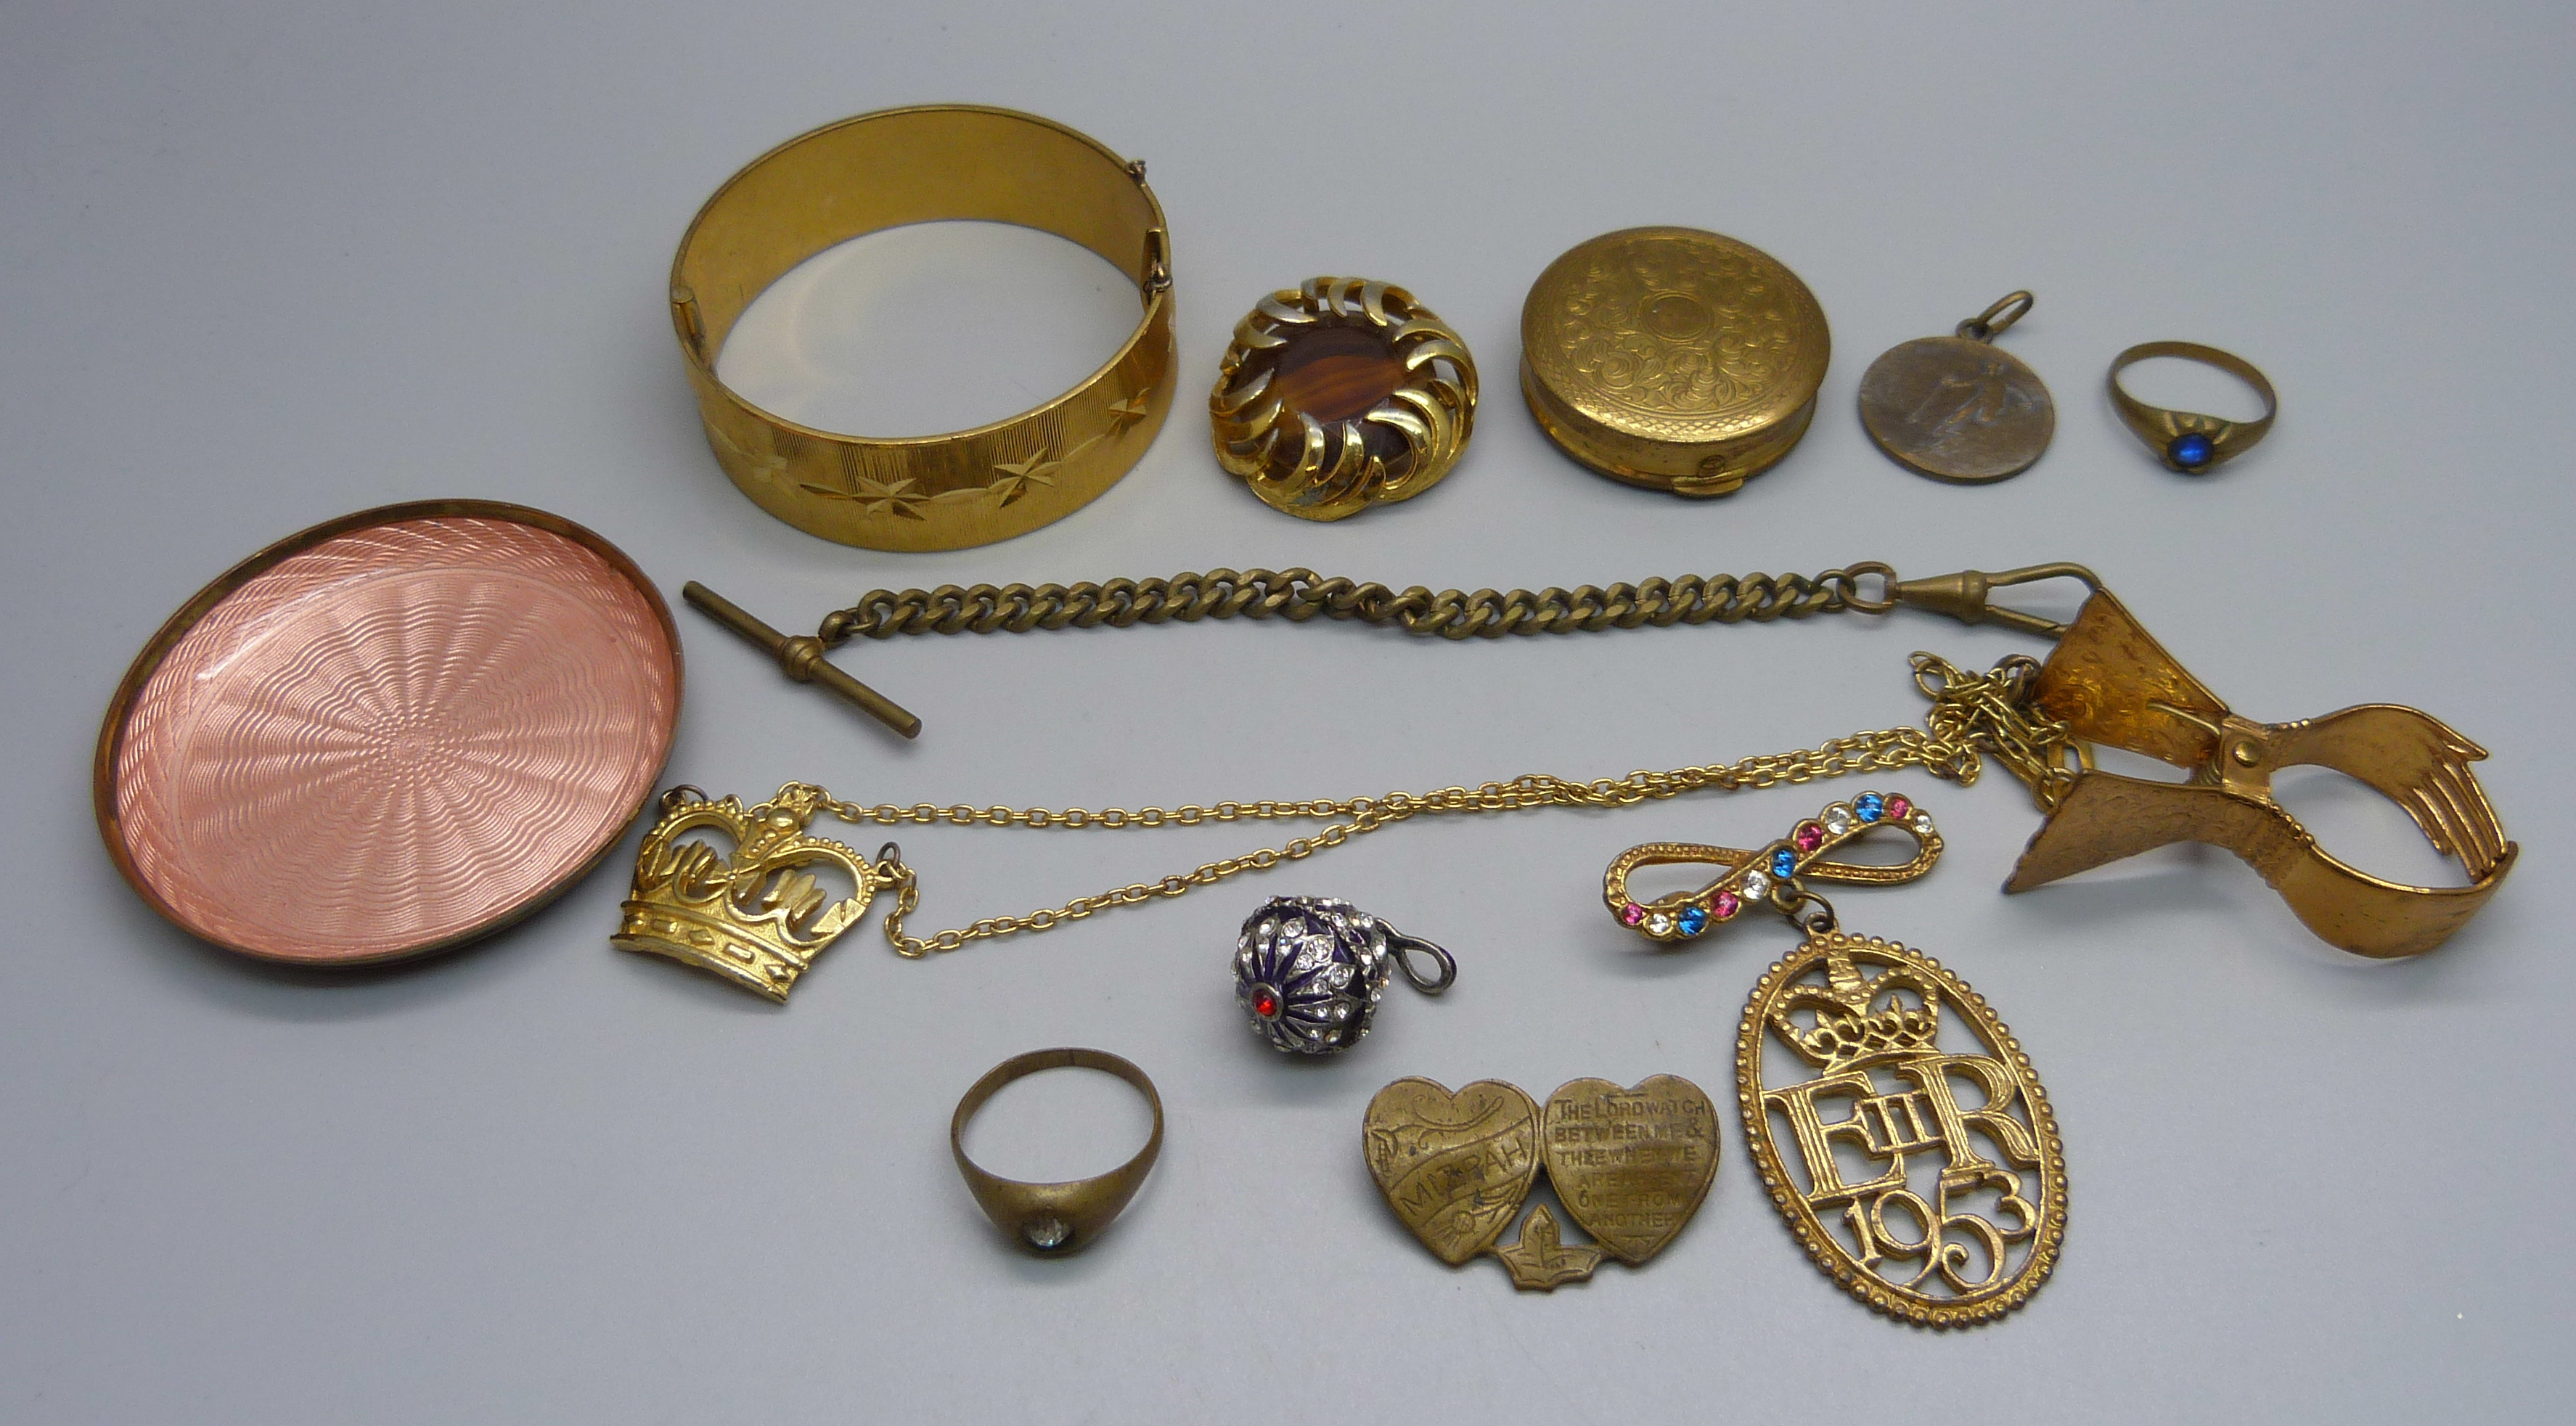 An 18ct rolled gold bracelet, a Guilloche enamel pin tray, vintage jewellery, etc.